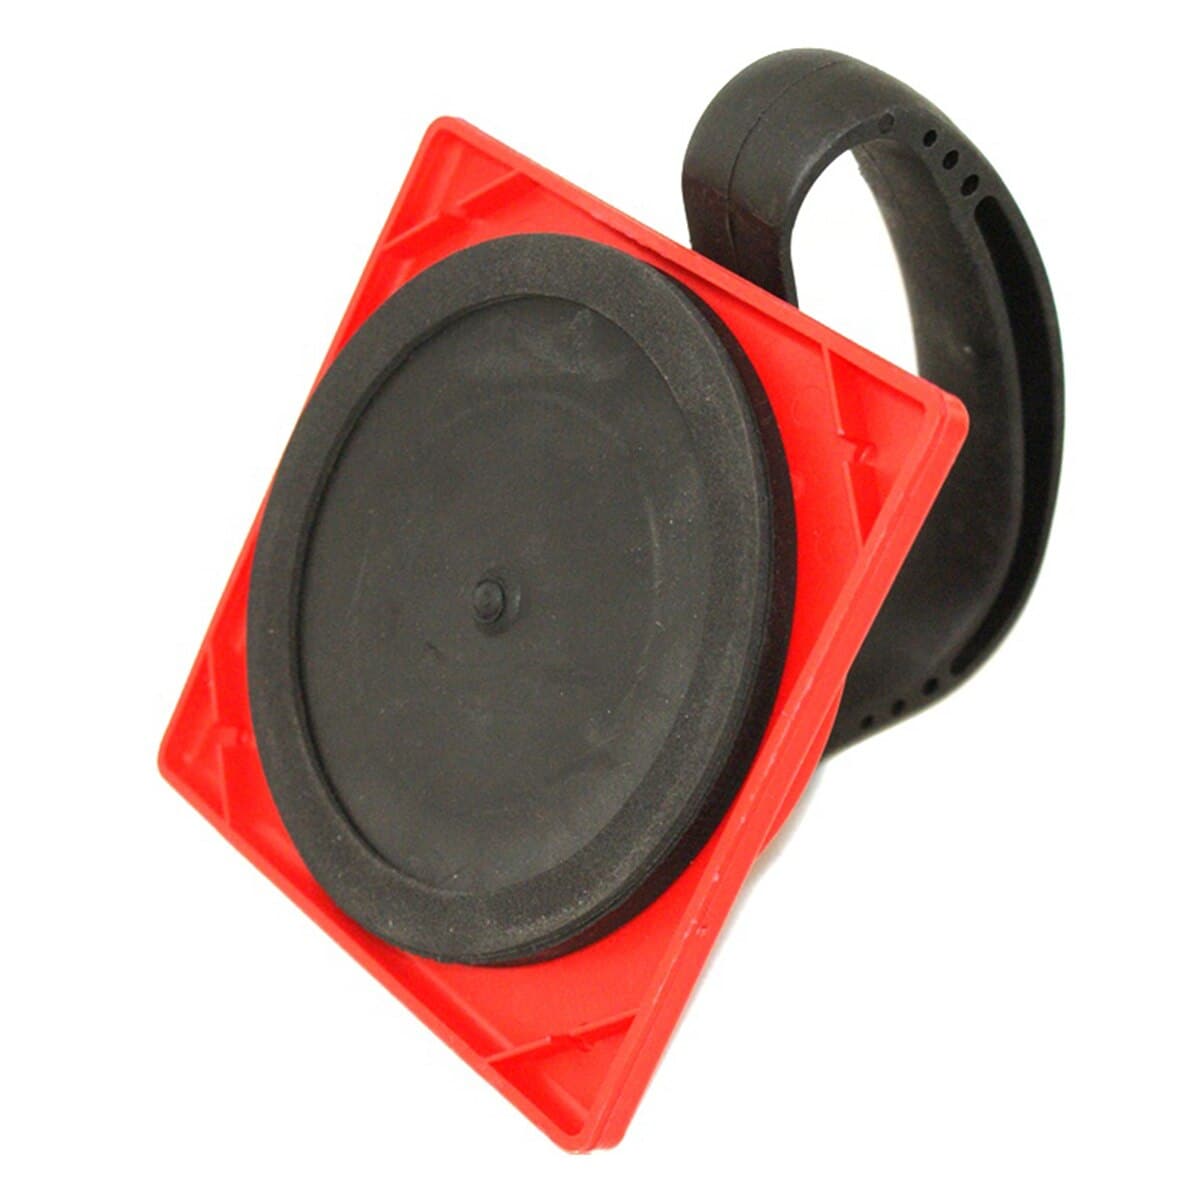 RTC Square Suction Cup - RTC Products